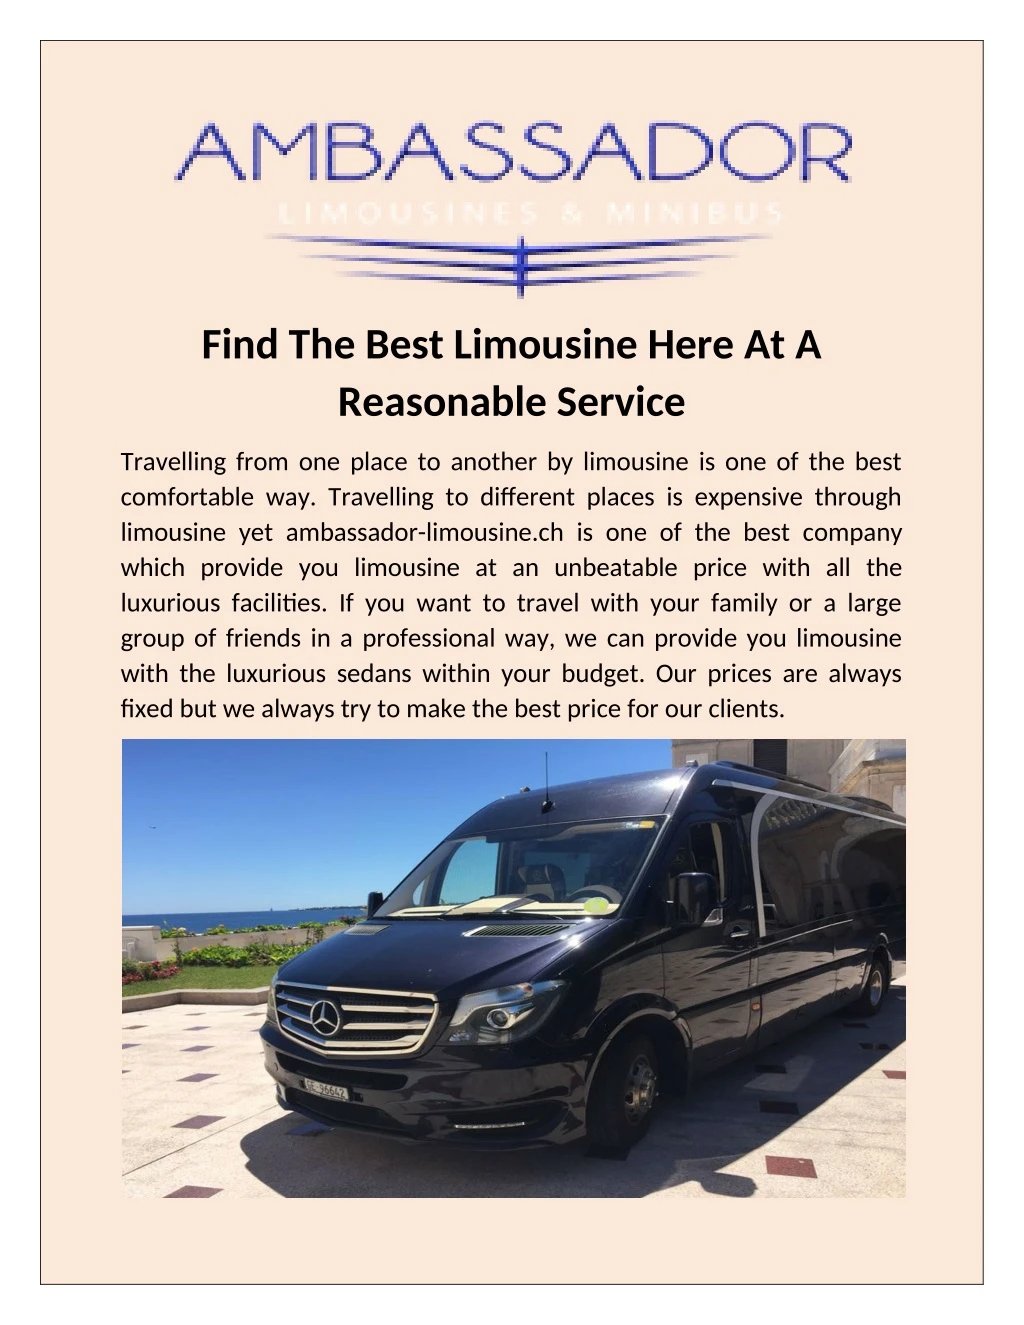 find the best limousine here at a reasonable